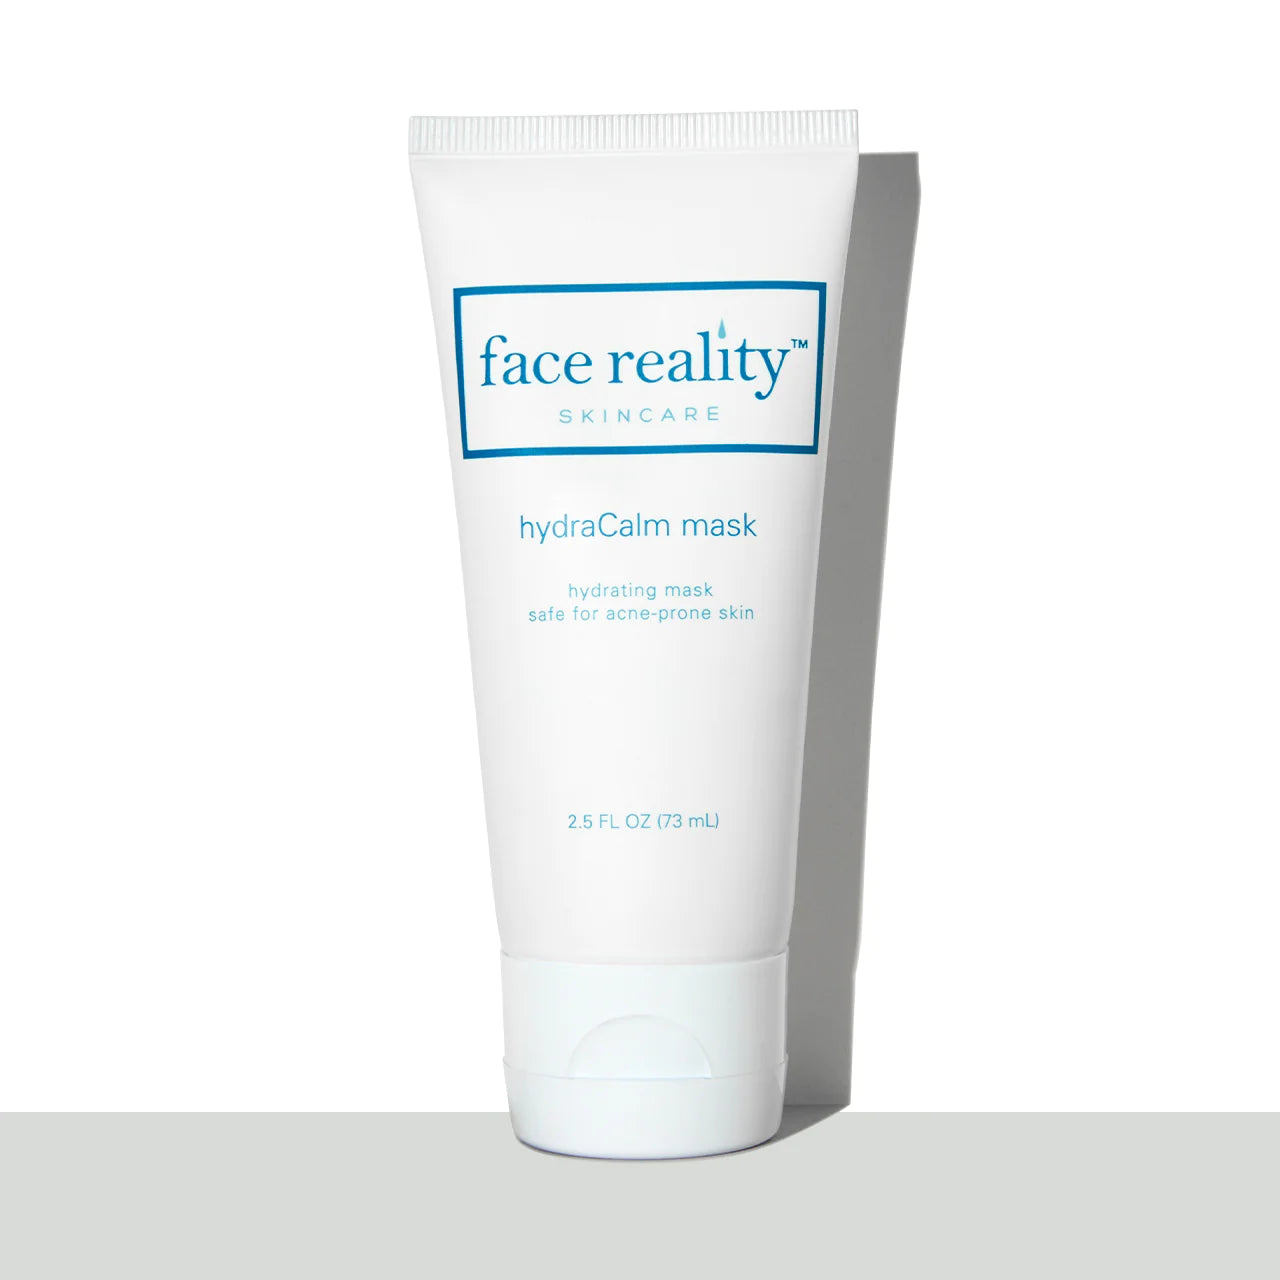 Face Reality HydraCalm mask tube